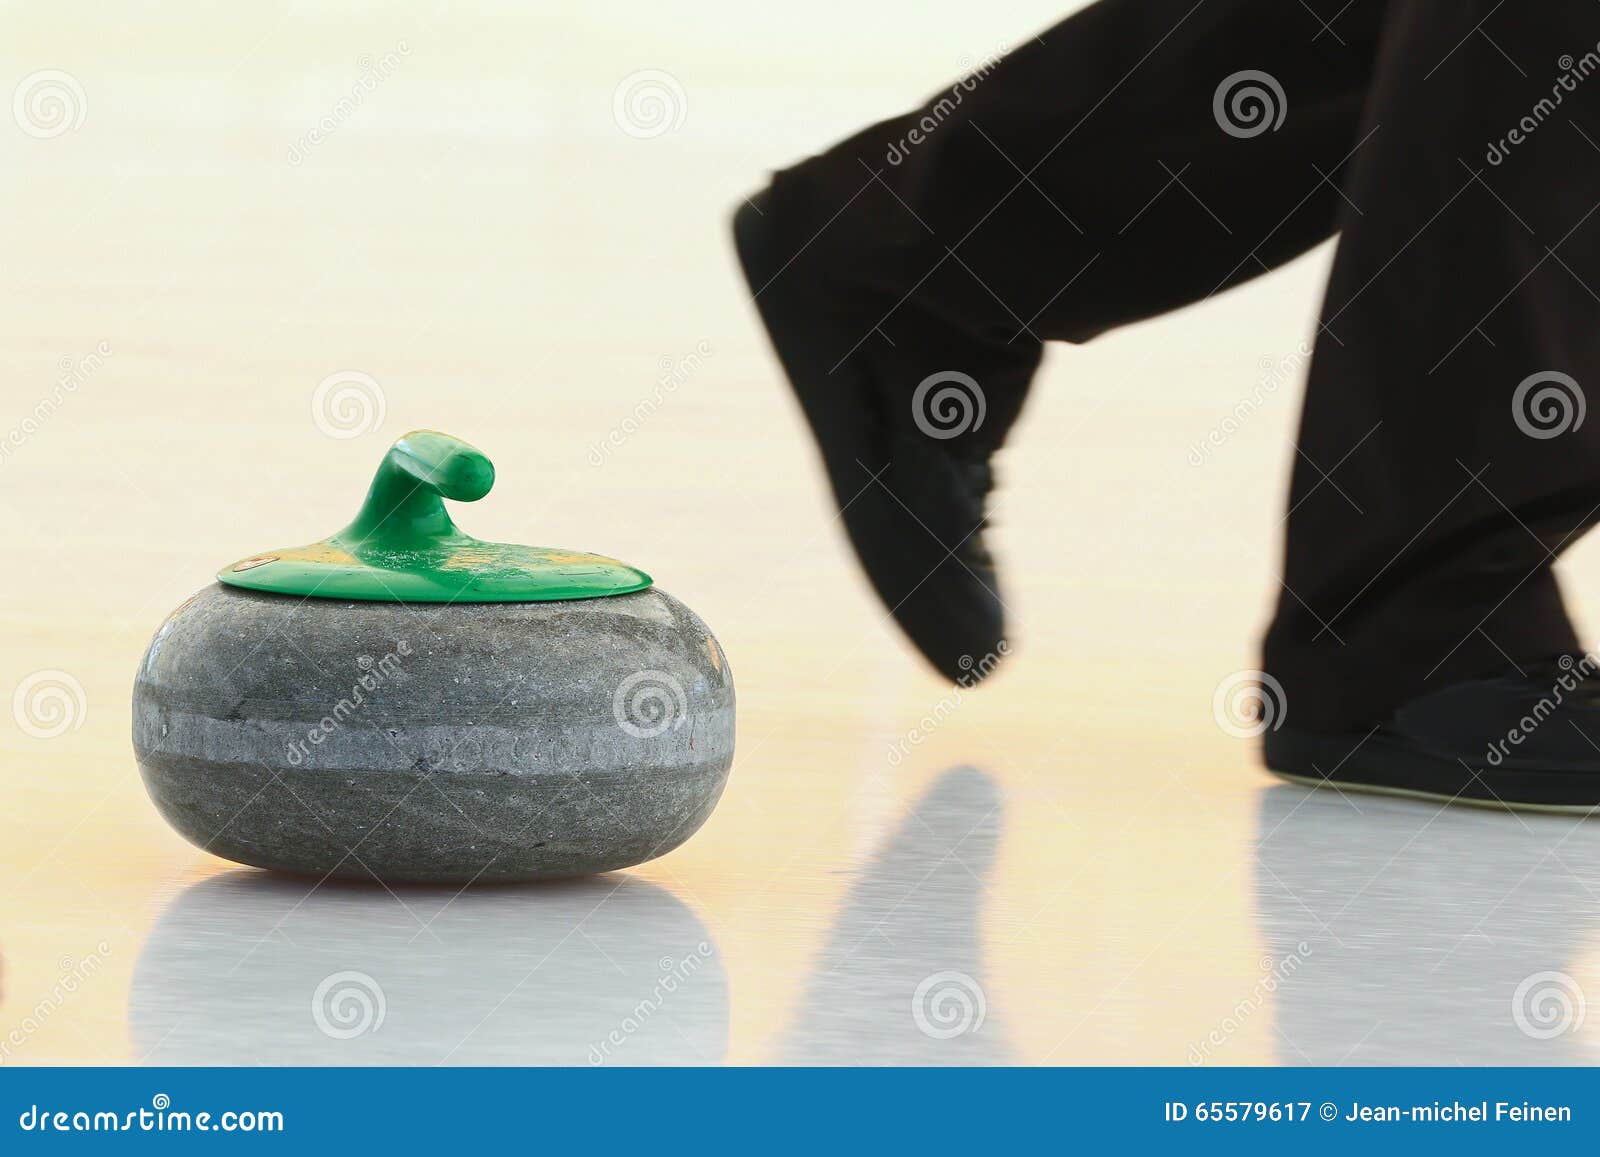 Curling Stone Sliding Down Ice Player S Feet Running Front 65579617 